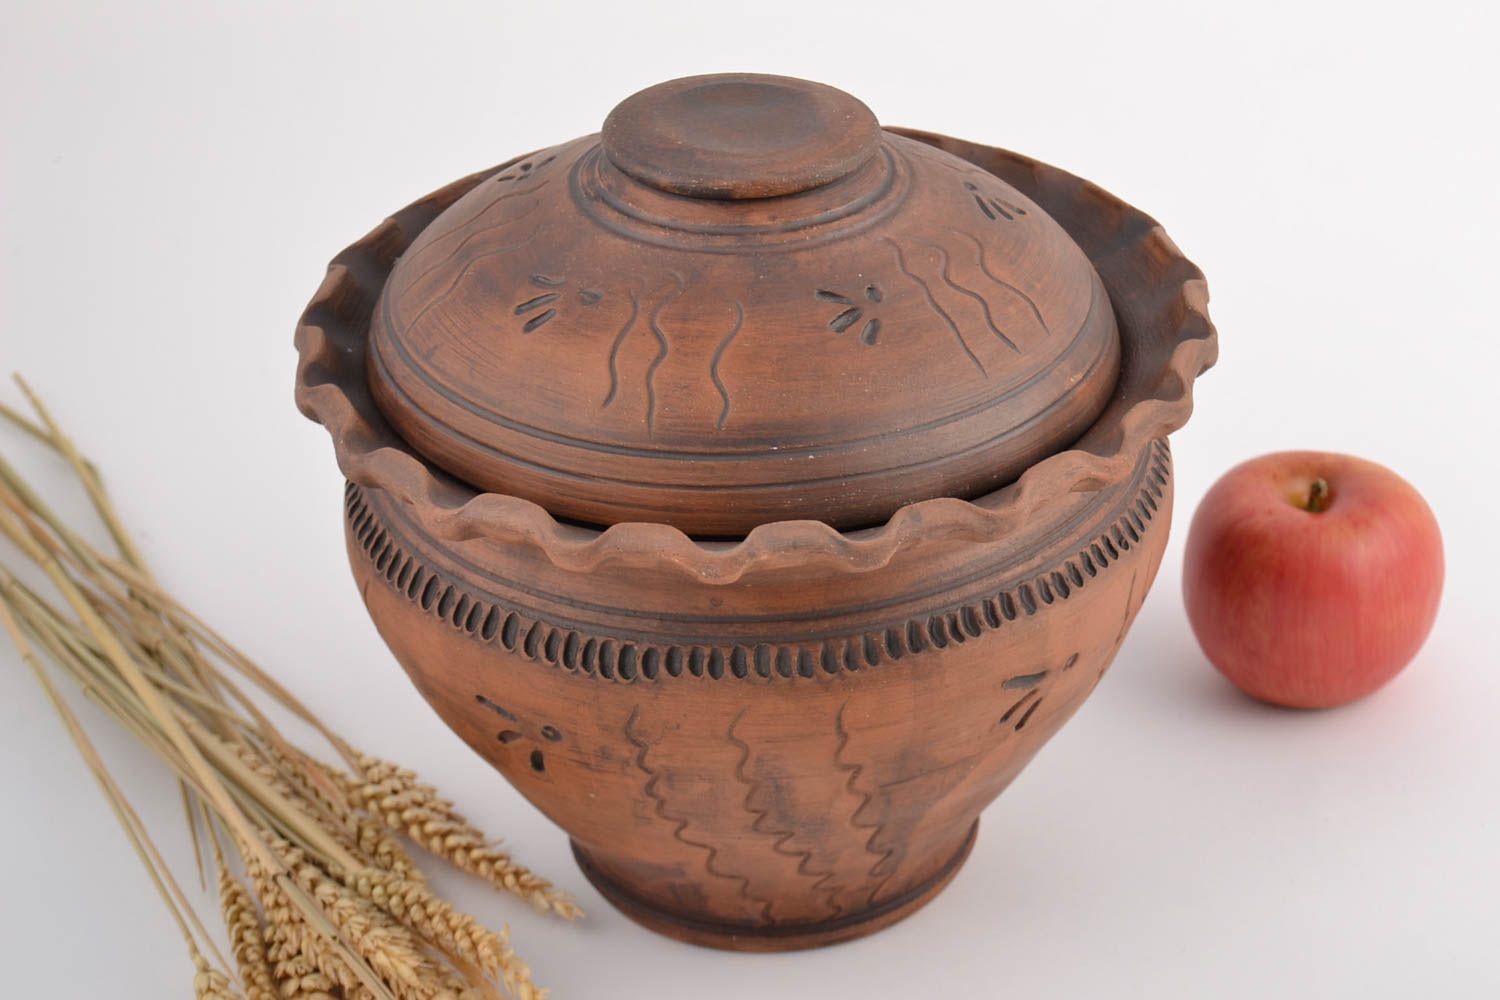 Homemade designer clay pot for roasting with lid 3.5 l average size photo 1